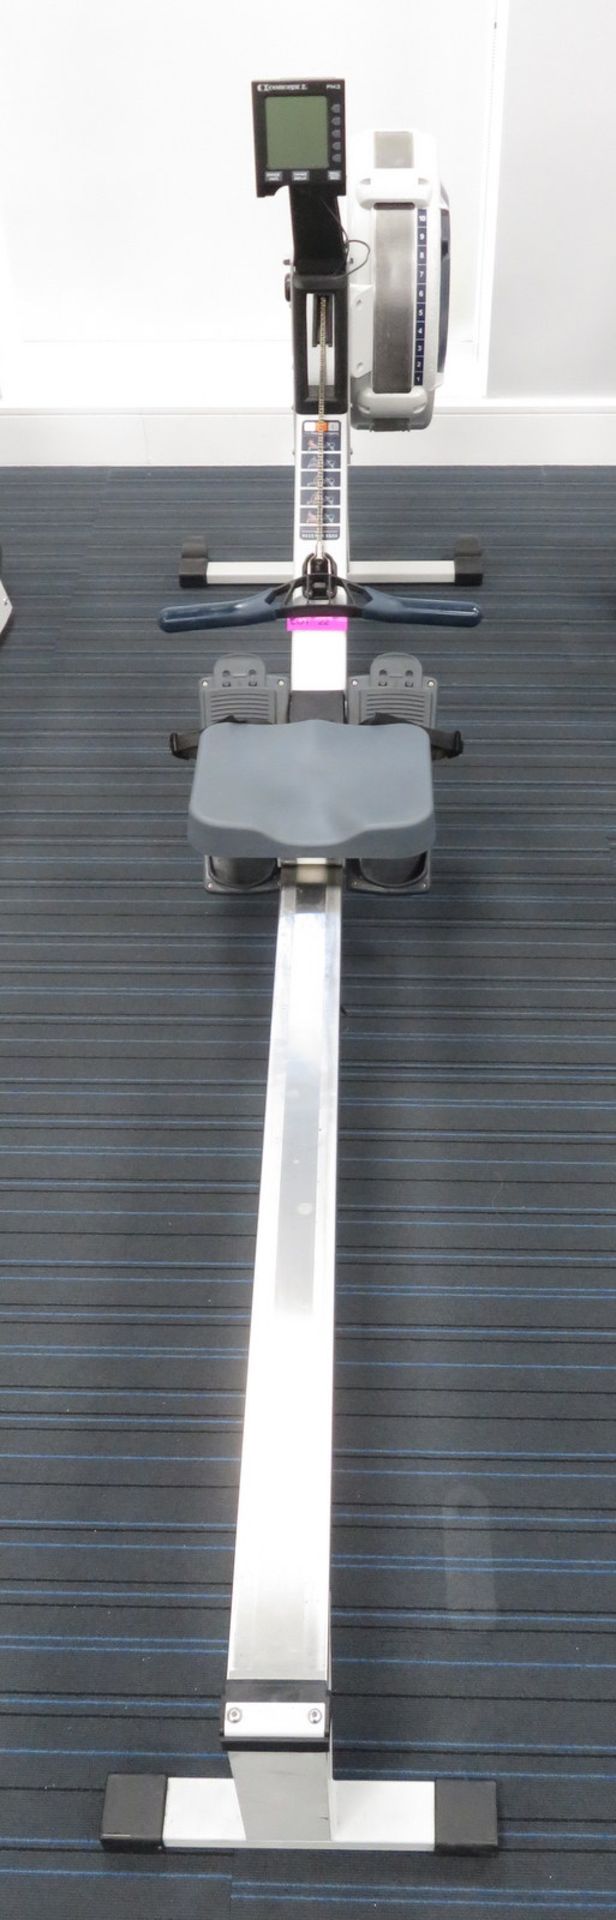 Concept 2 Indoor Rower Model D, Complete With PM3 Display Console. - Image 2 of 10